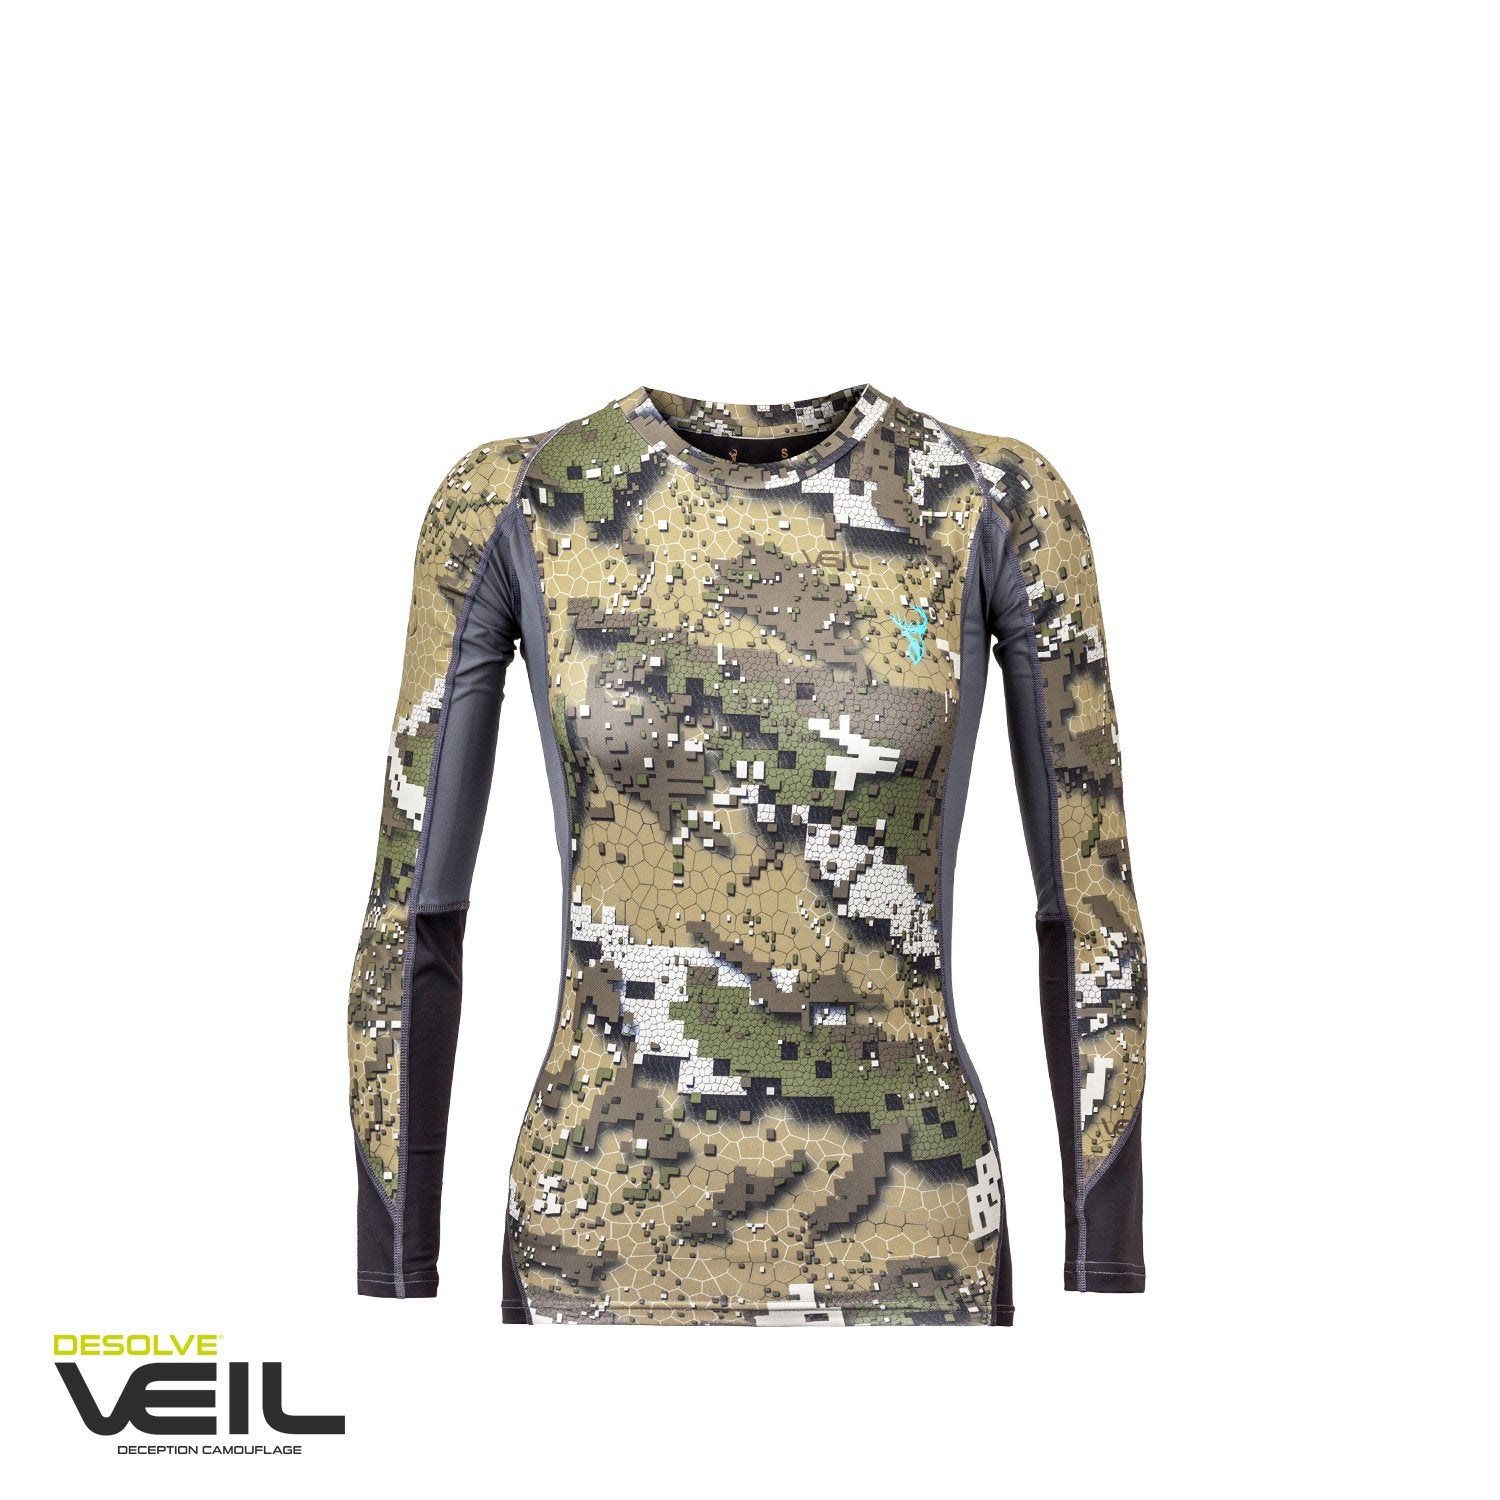 Hunters Element Womens Core Top - 8 / DESOLVE VEIL - Mansfield Hunting & Fishing - Products to prepare for Corona Virus